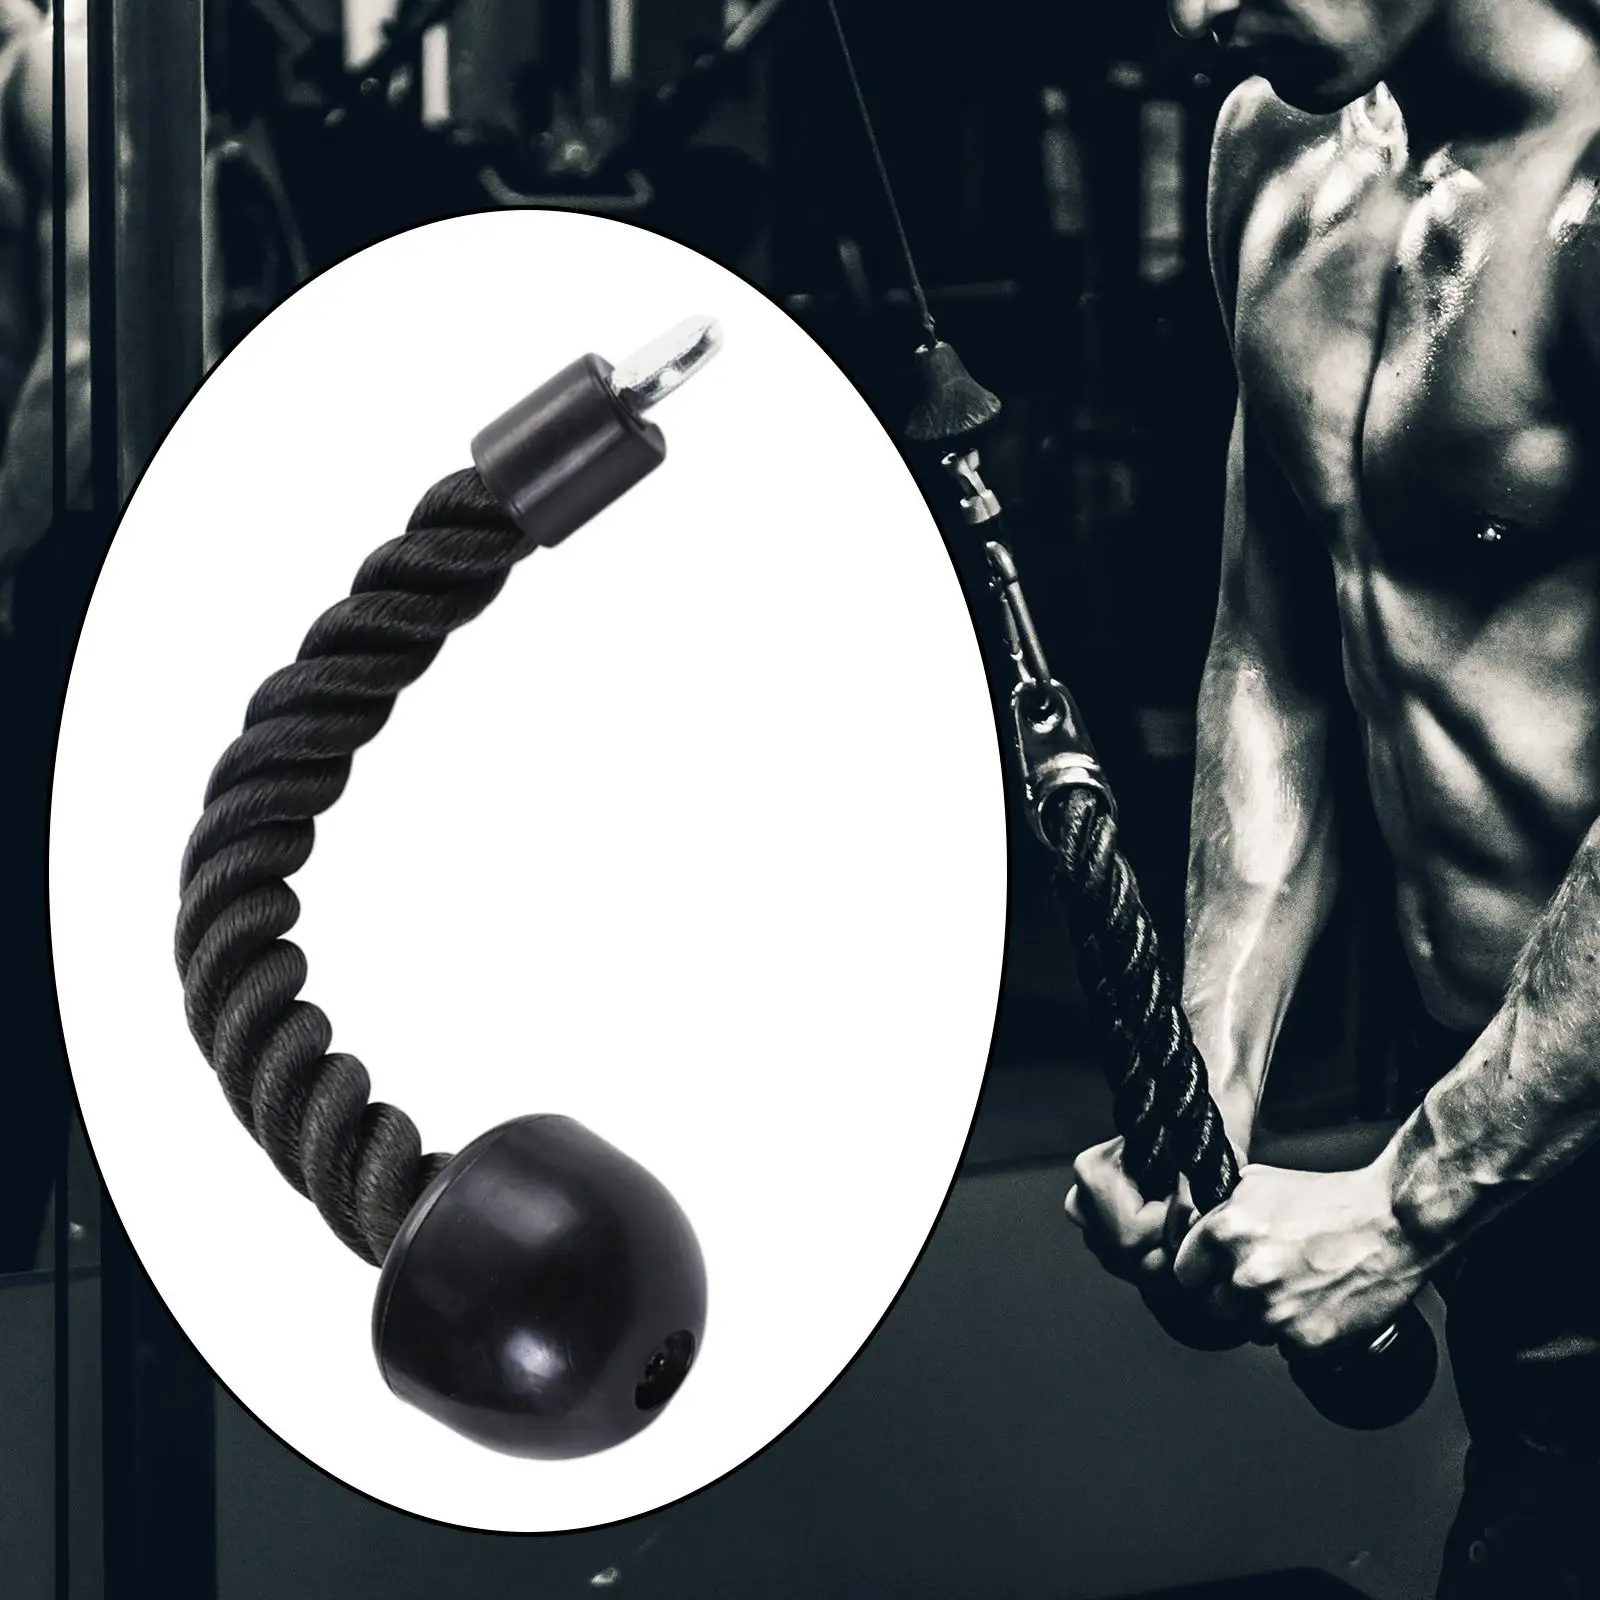 Fitness Pull Down Rope Single Grip Cable Attachments Weight Lifting Bodybuilding Face Pulls Push Downs Crunches Heavy Duty